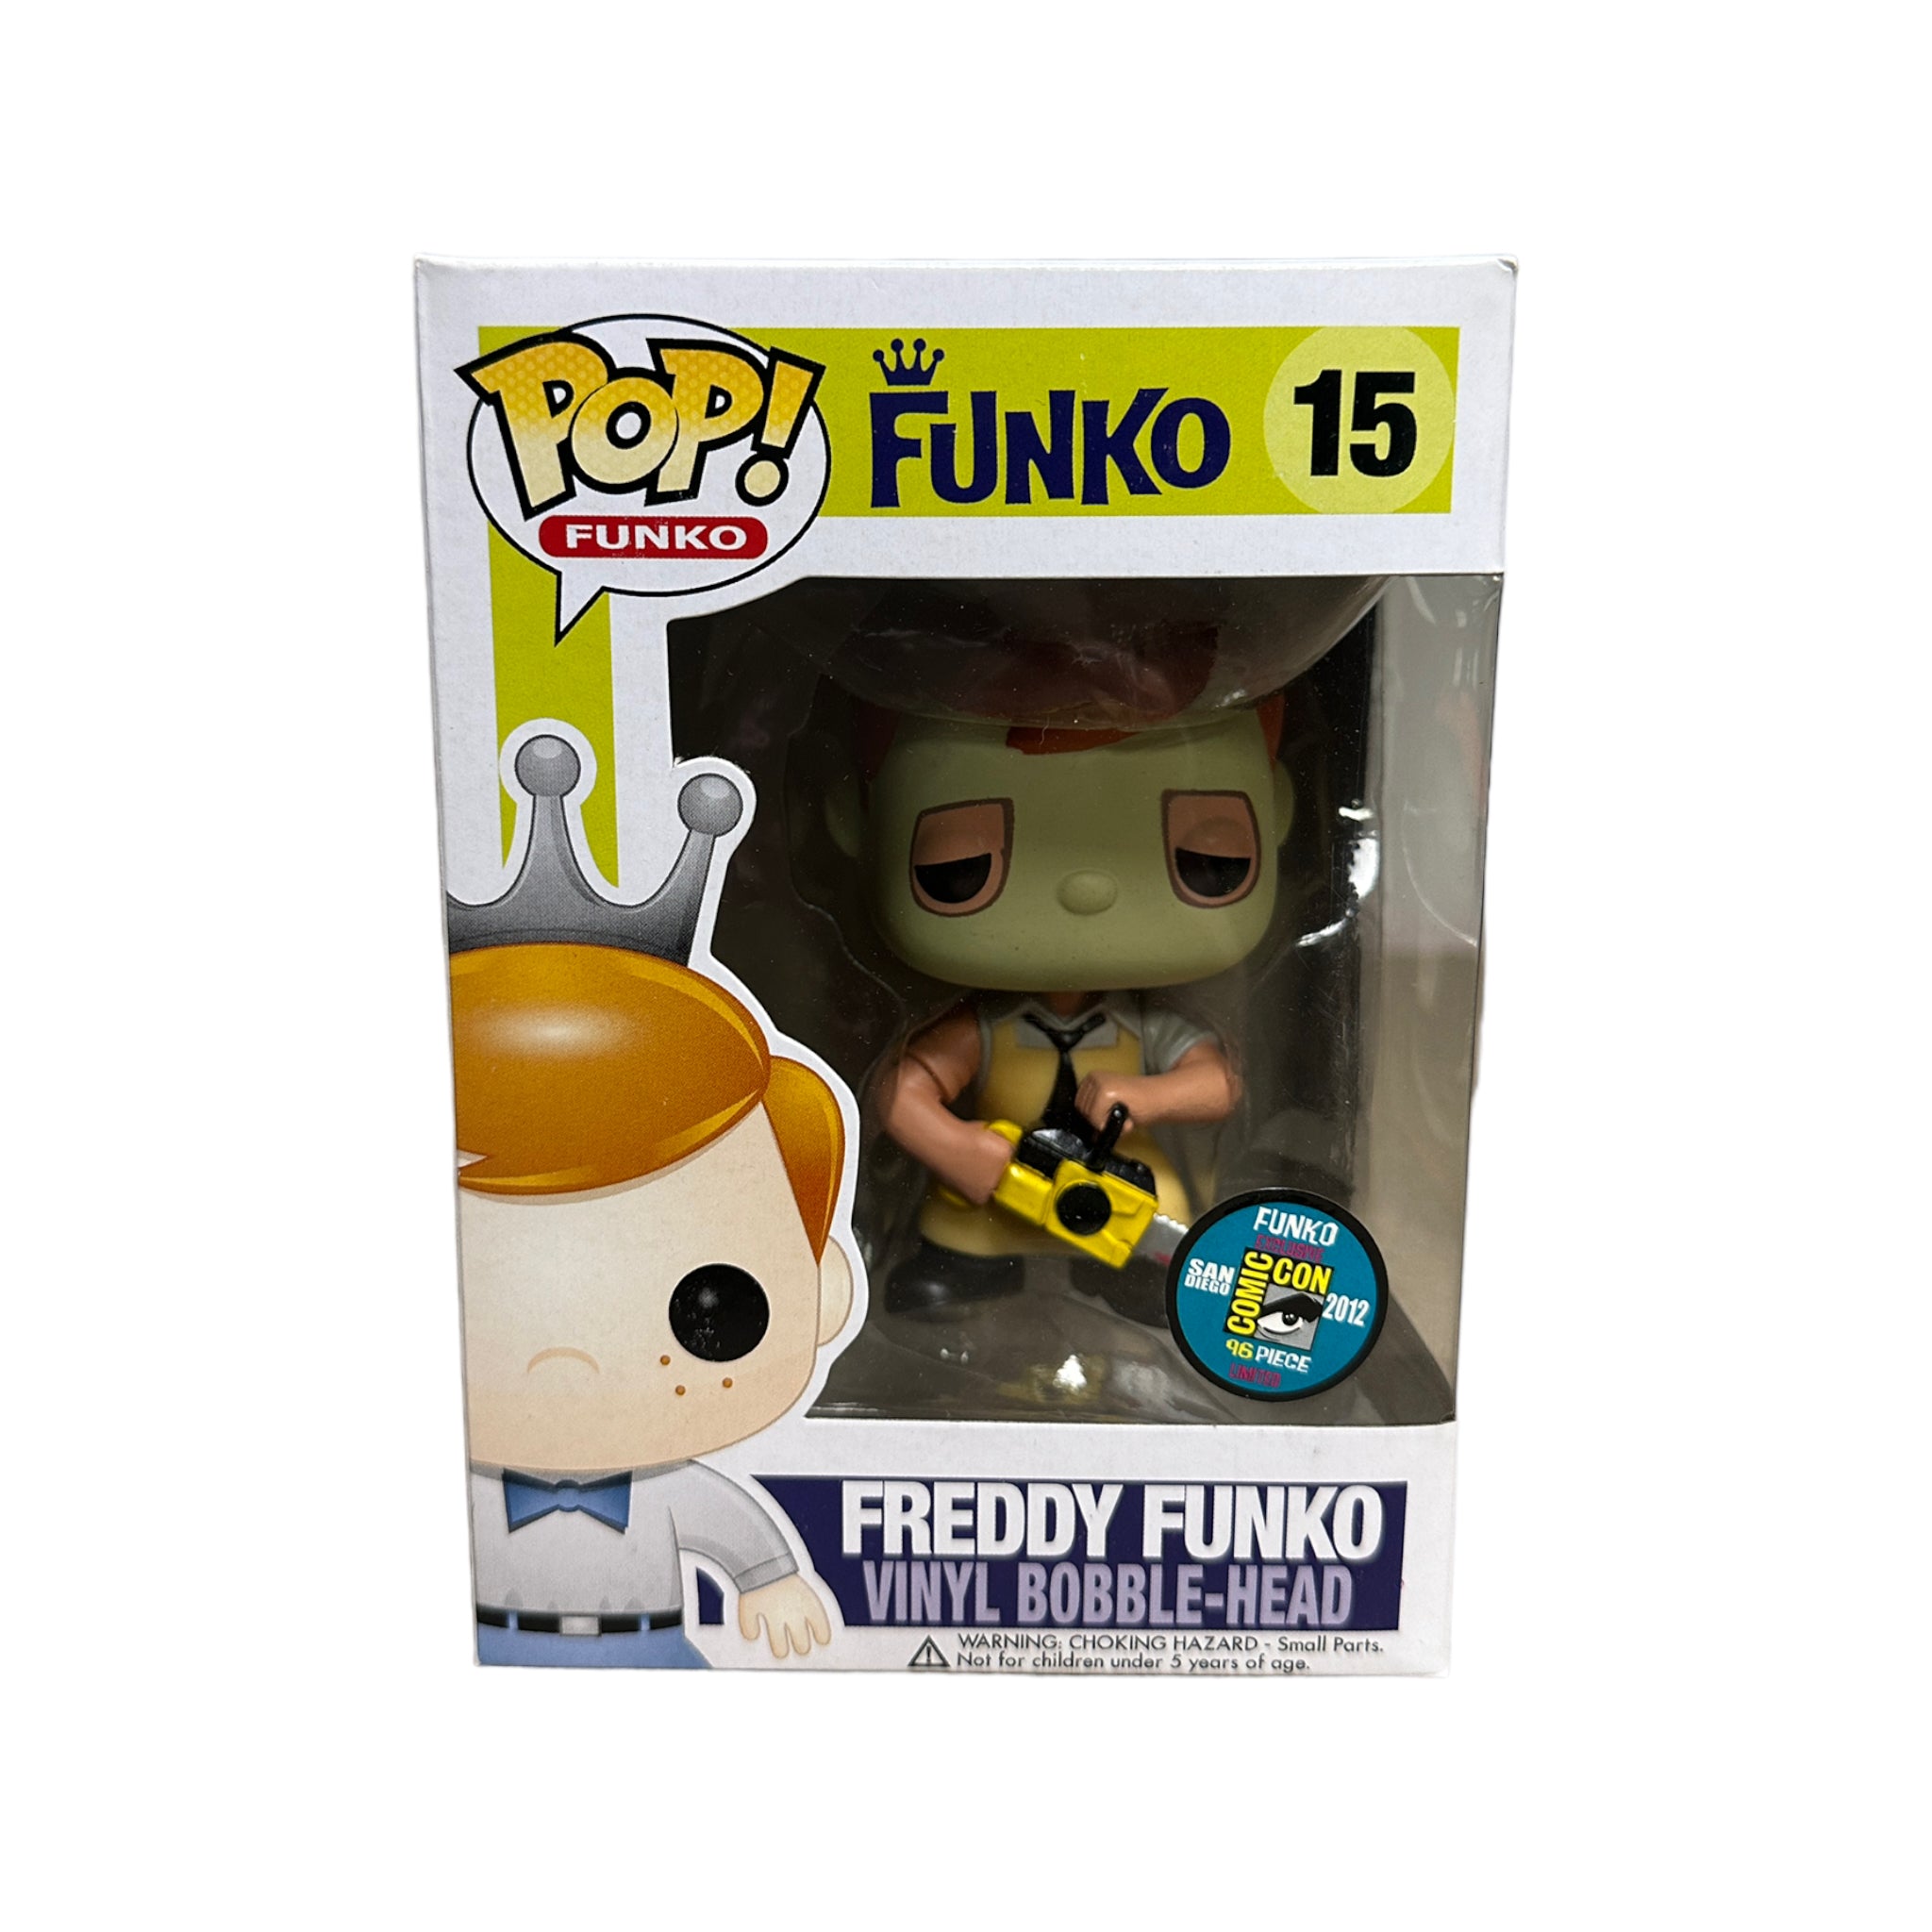 Freddy Funko as Leatherface #15 Funko Pop! - SDCC 2012 Exclusive LE96 Pcs - Condition 7.5/10